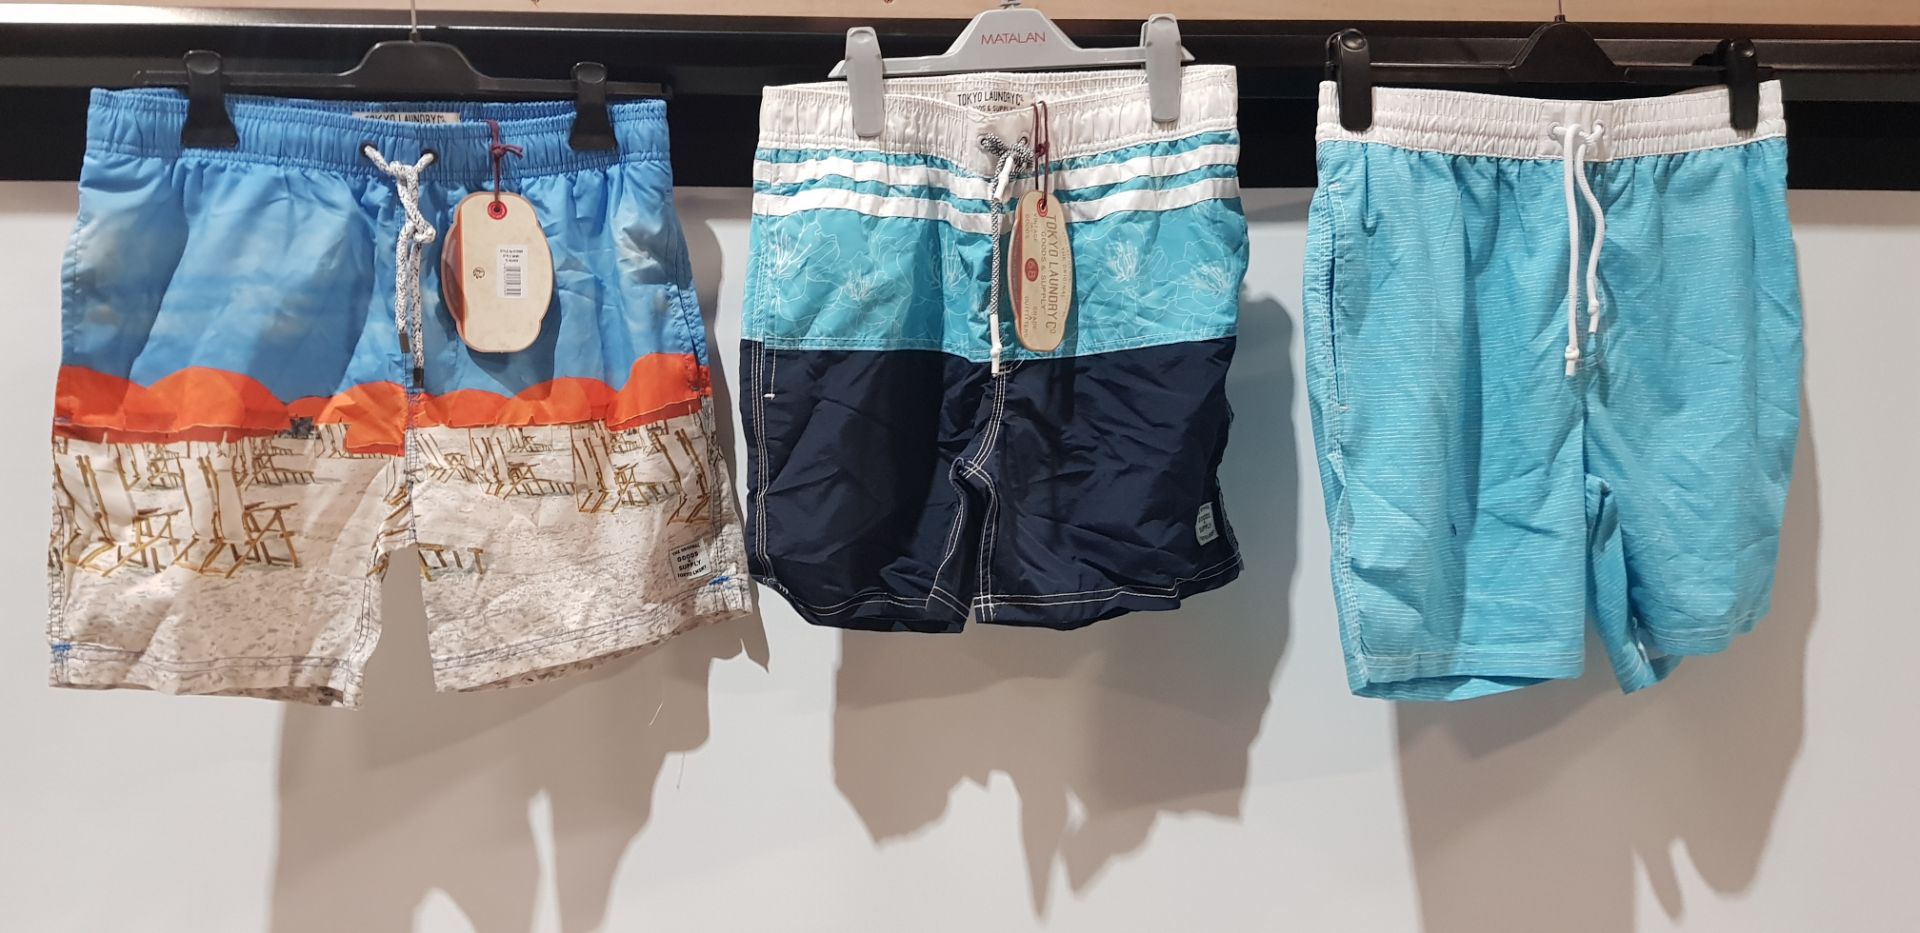 16 X BRAND NEW TOKYO LAUNDRY SWIMMING SHORTS IN MIXED STYLES AND SIZES- RRP EACH £18.99- TOTAL £